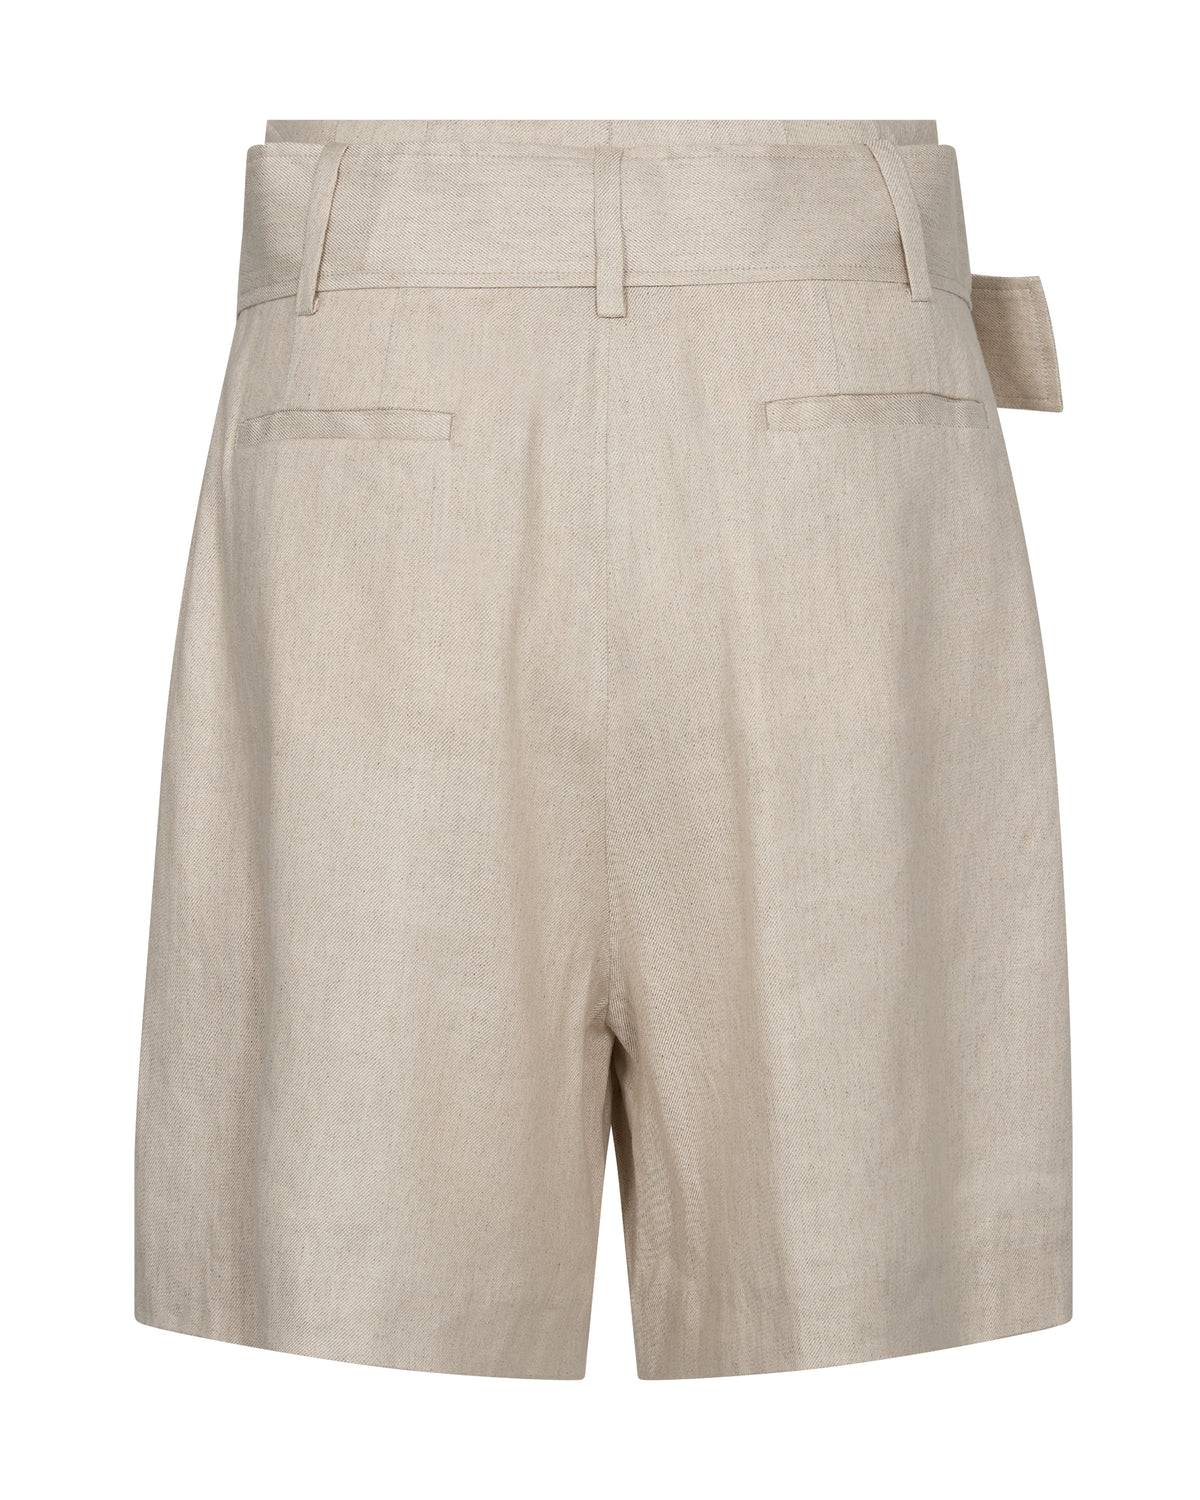 Ecru shorts with pleated front and wide matching fabric belt with fabric buckle